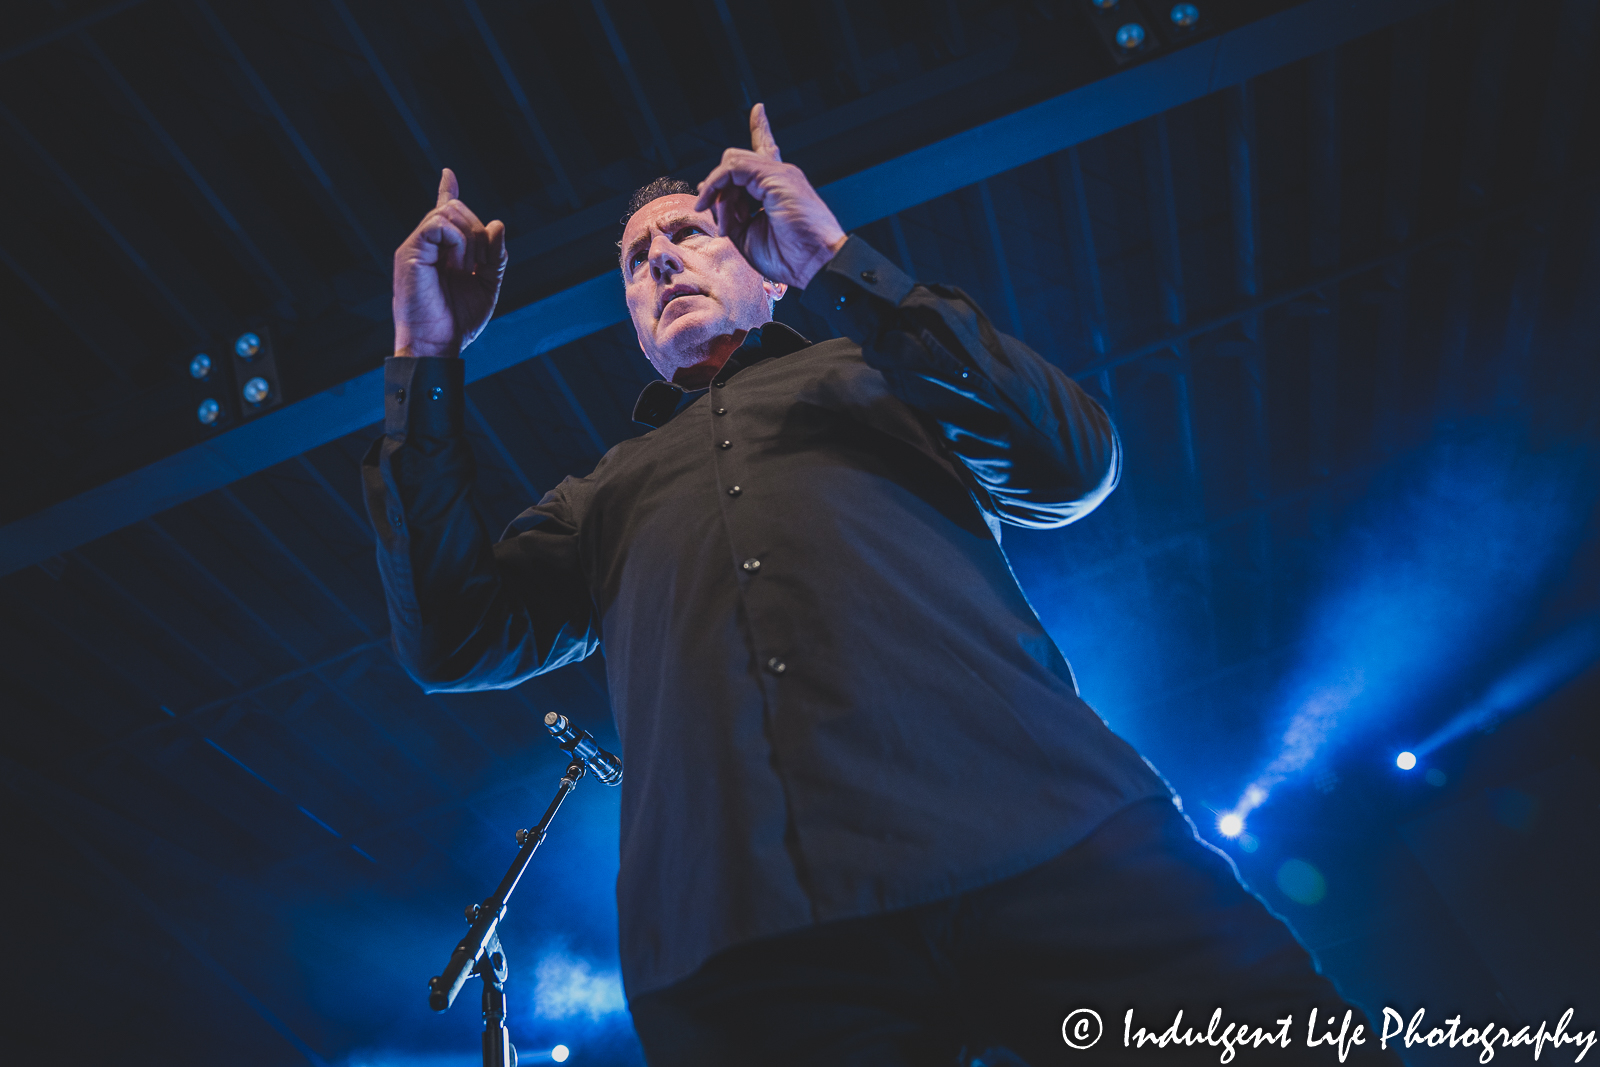 Frontman Andy McCluskey of Orchestral Manoeuvres in the Dark live in concert at The Truman in Kansas City, MO on May 8, 2022.